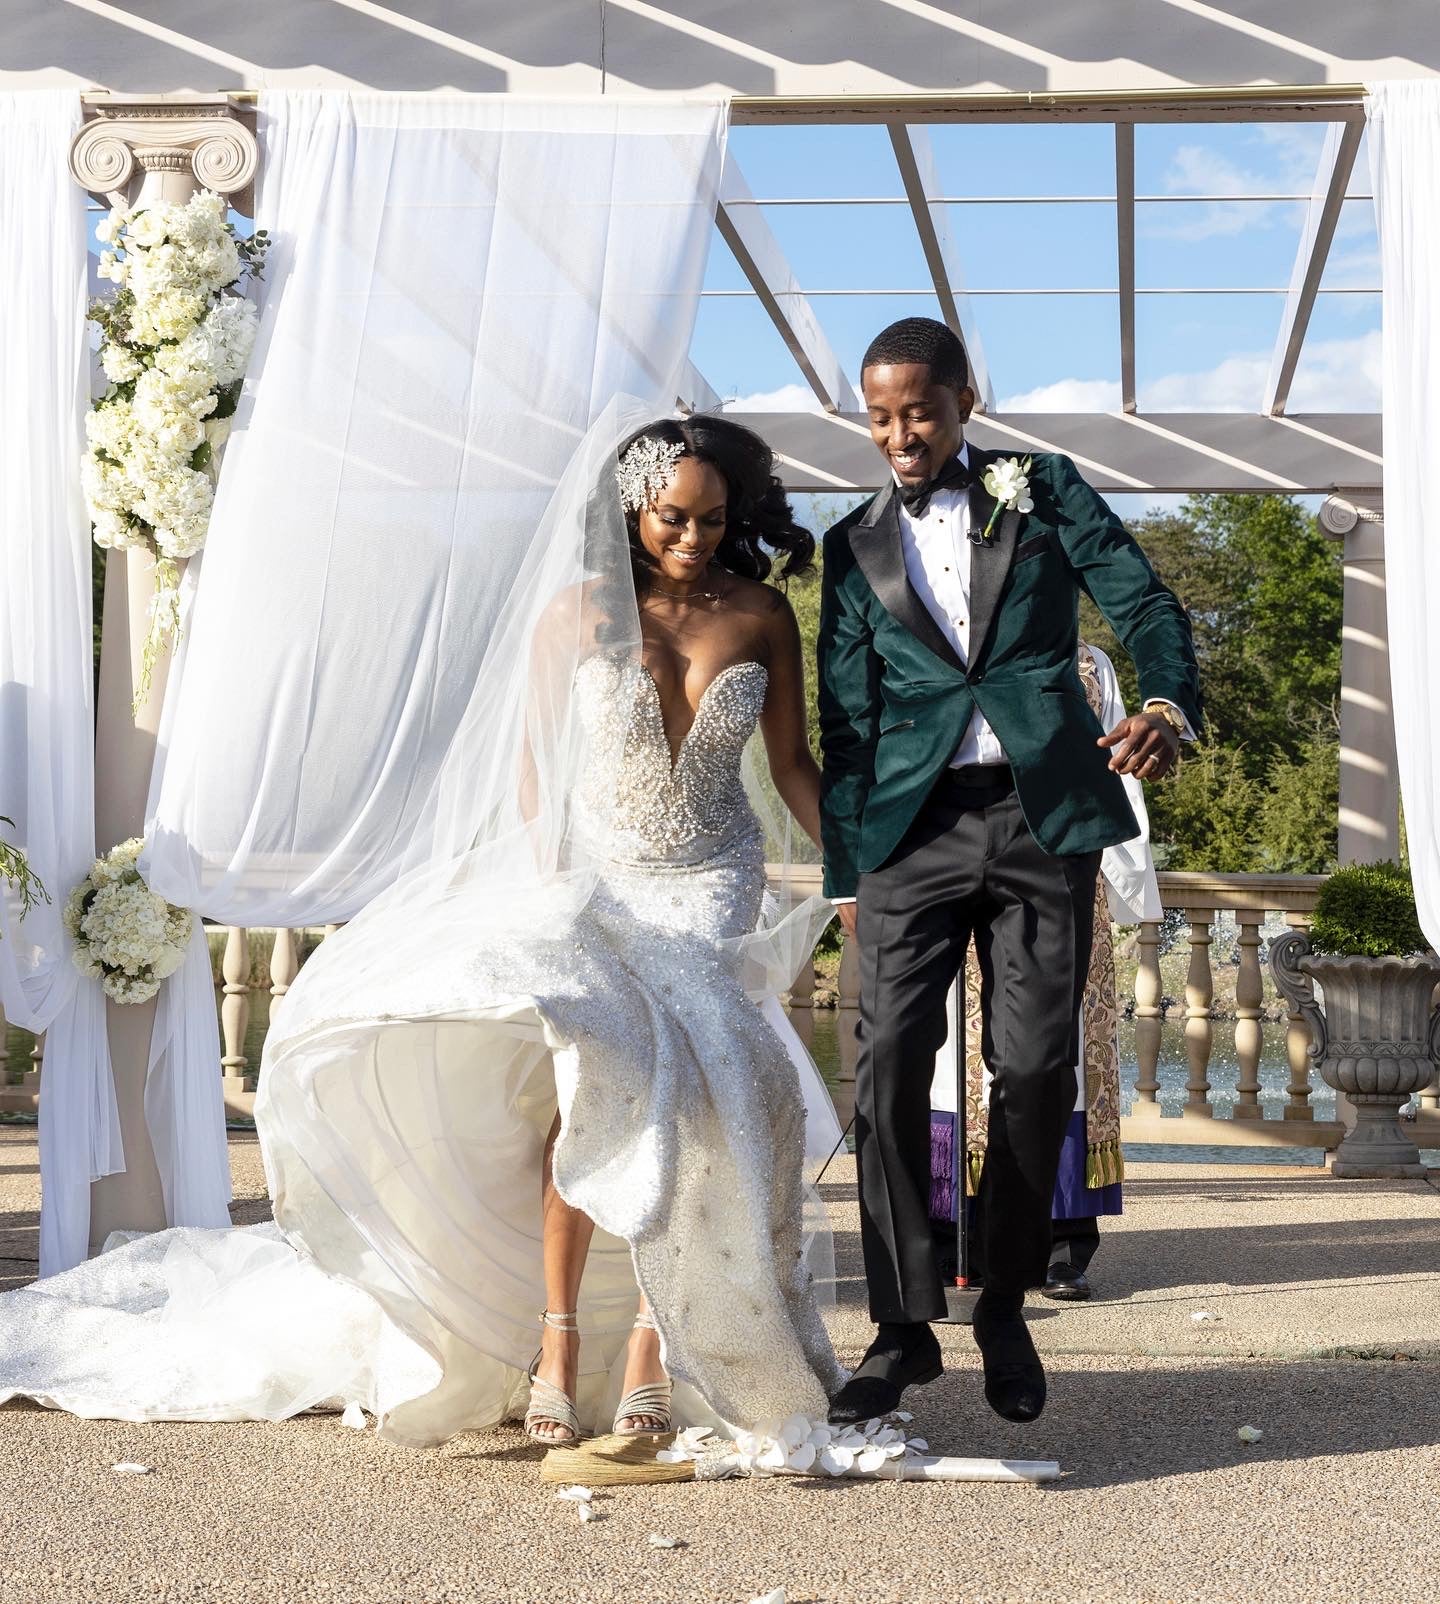 High School Friends Turned Lovers, Nia And Shakeel's Vineyard Wedding Will Blow You Away